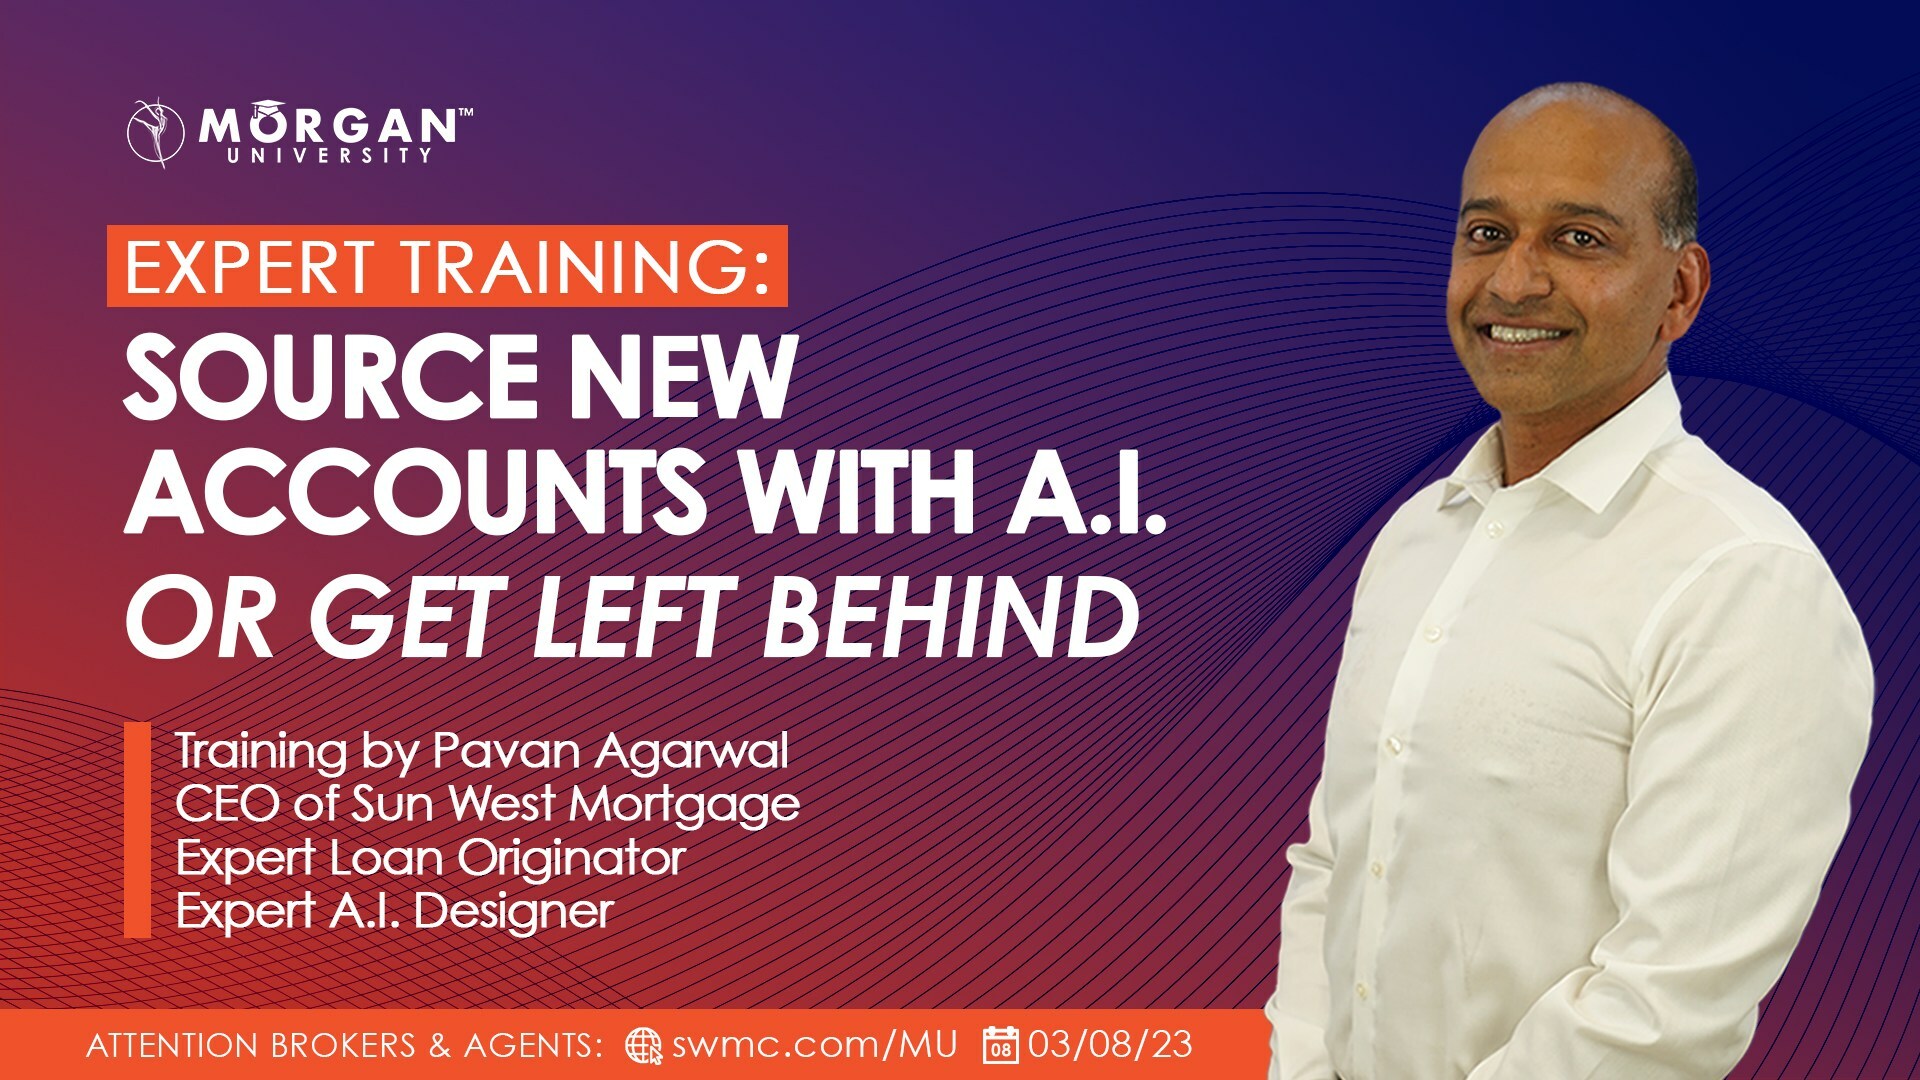 Sun West Mortgage Launch Real Estate Professionals Training Course For New AI Personal Assistant MORGAN